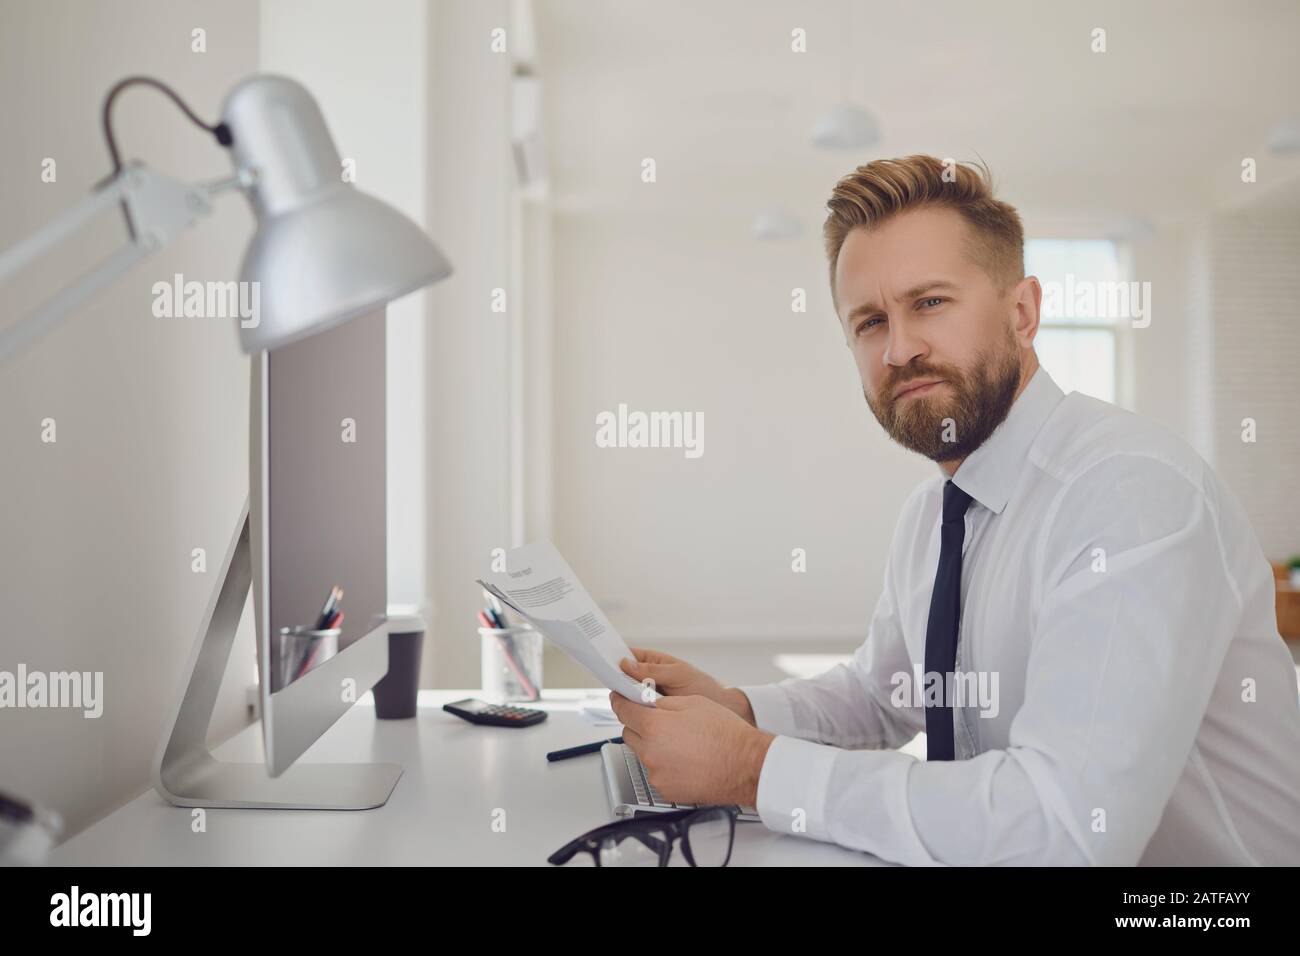 Portrait of a serious busy business man bearded sitting at a table with computers in the office. Stock Photo